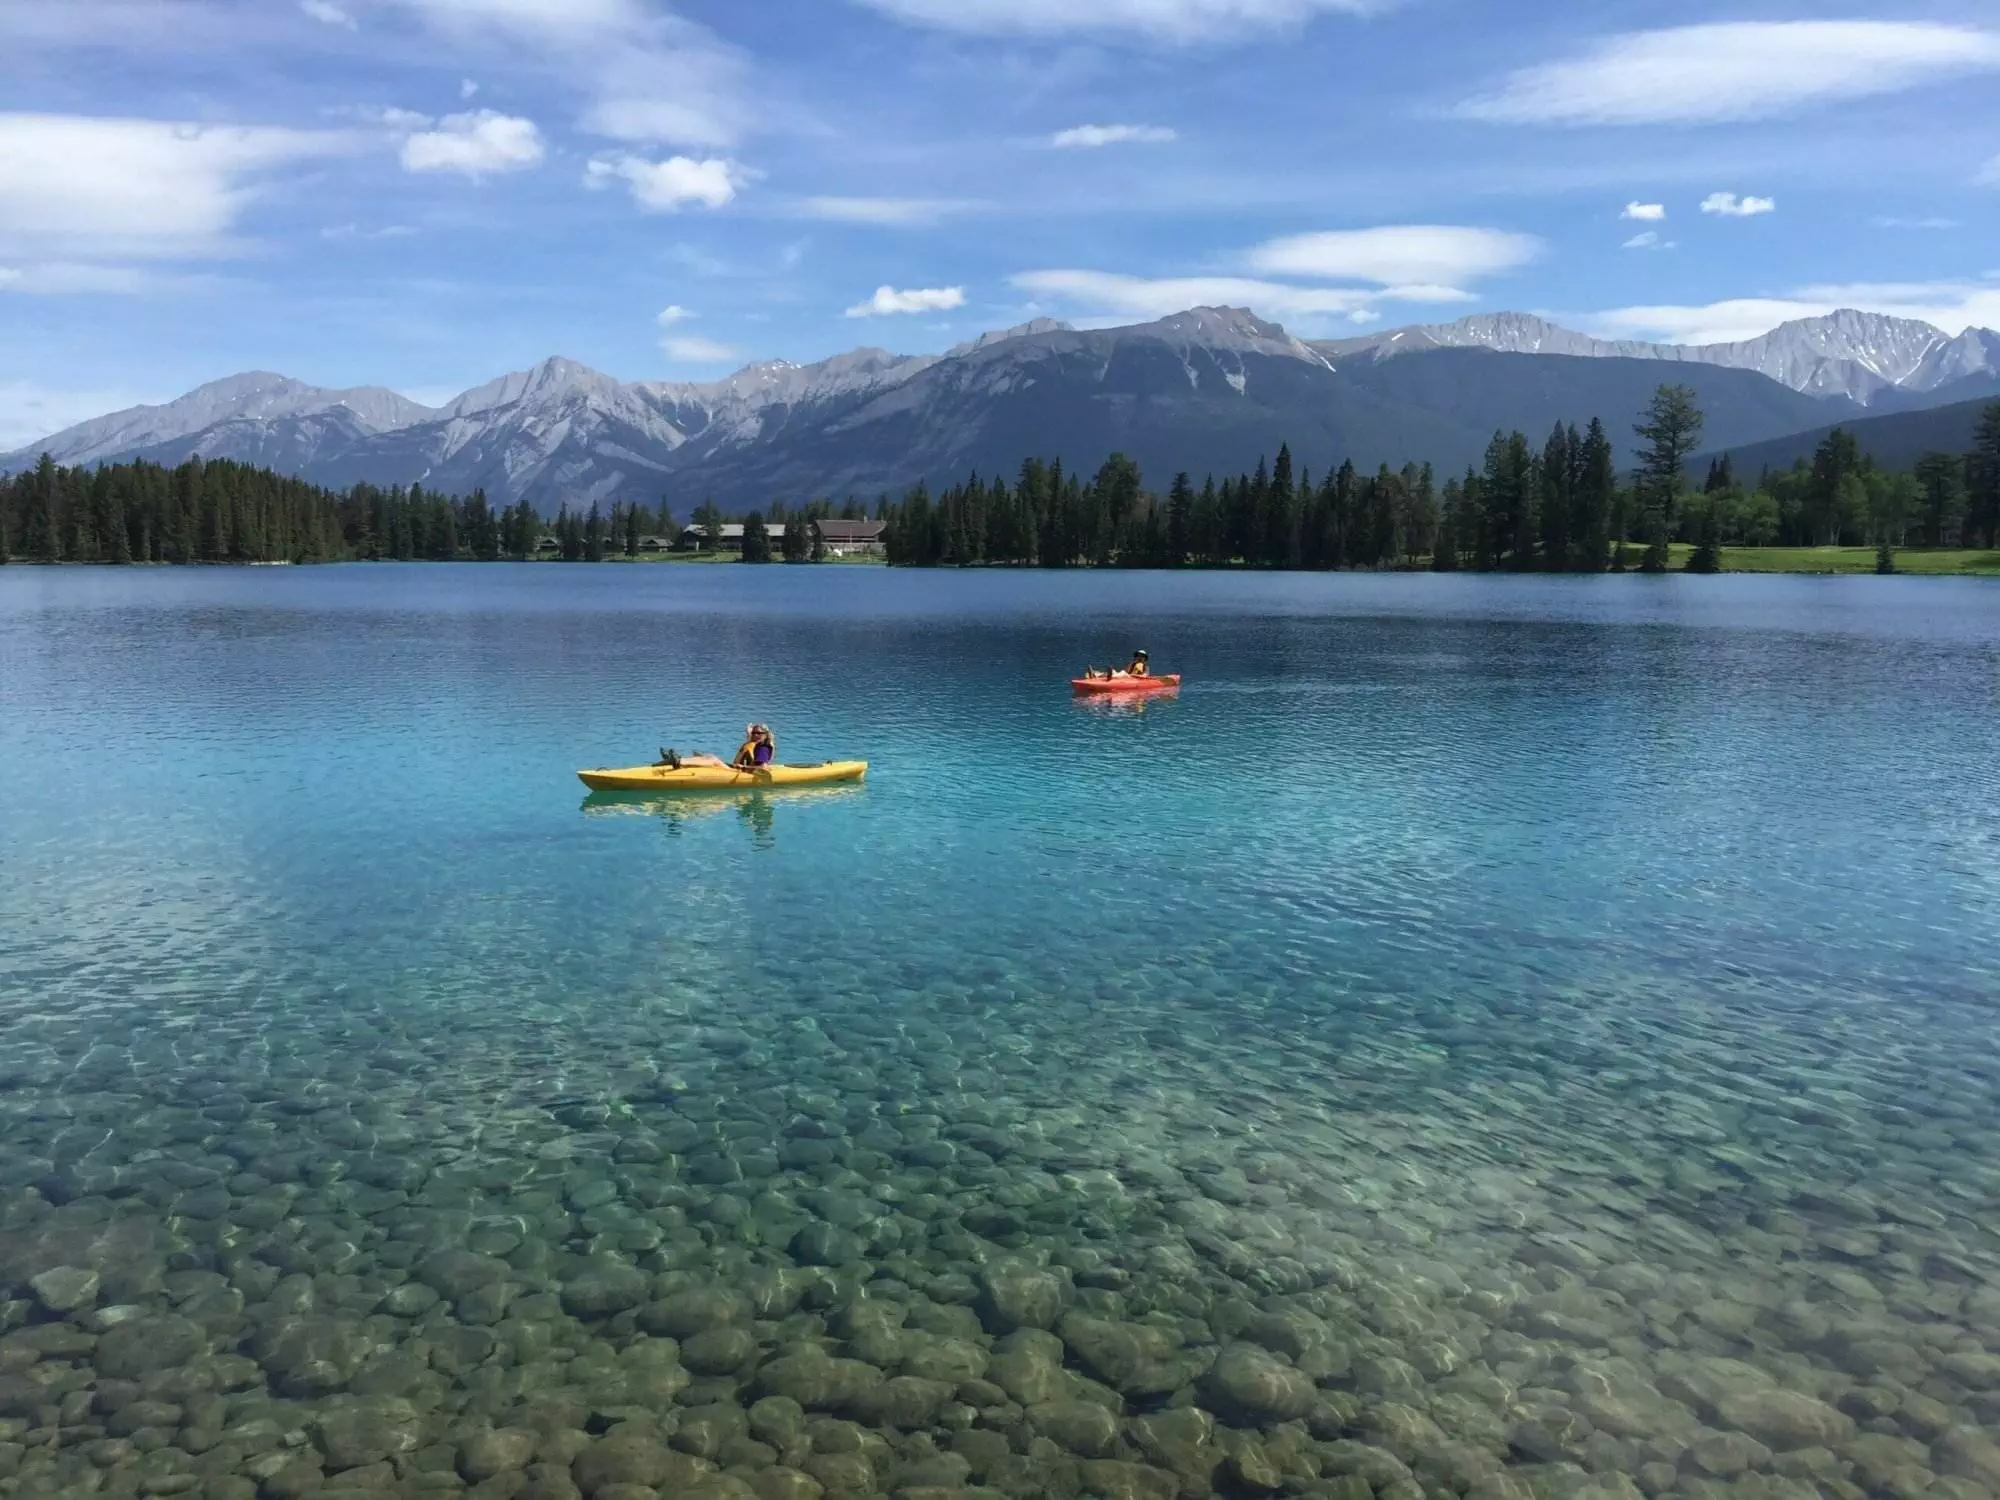 Few people boating in the lakes of Jasper National Park.